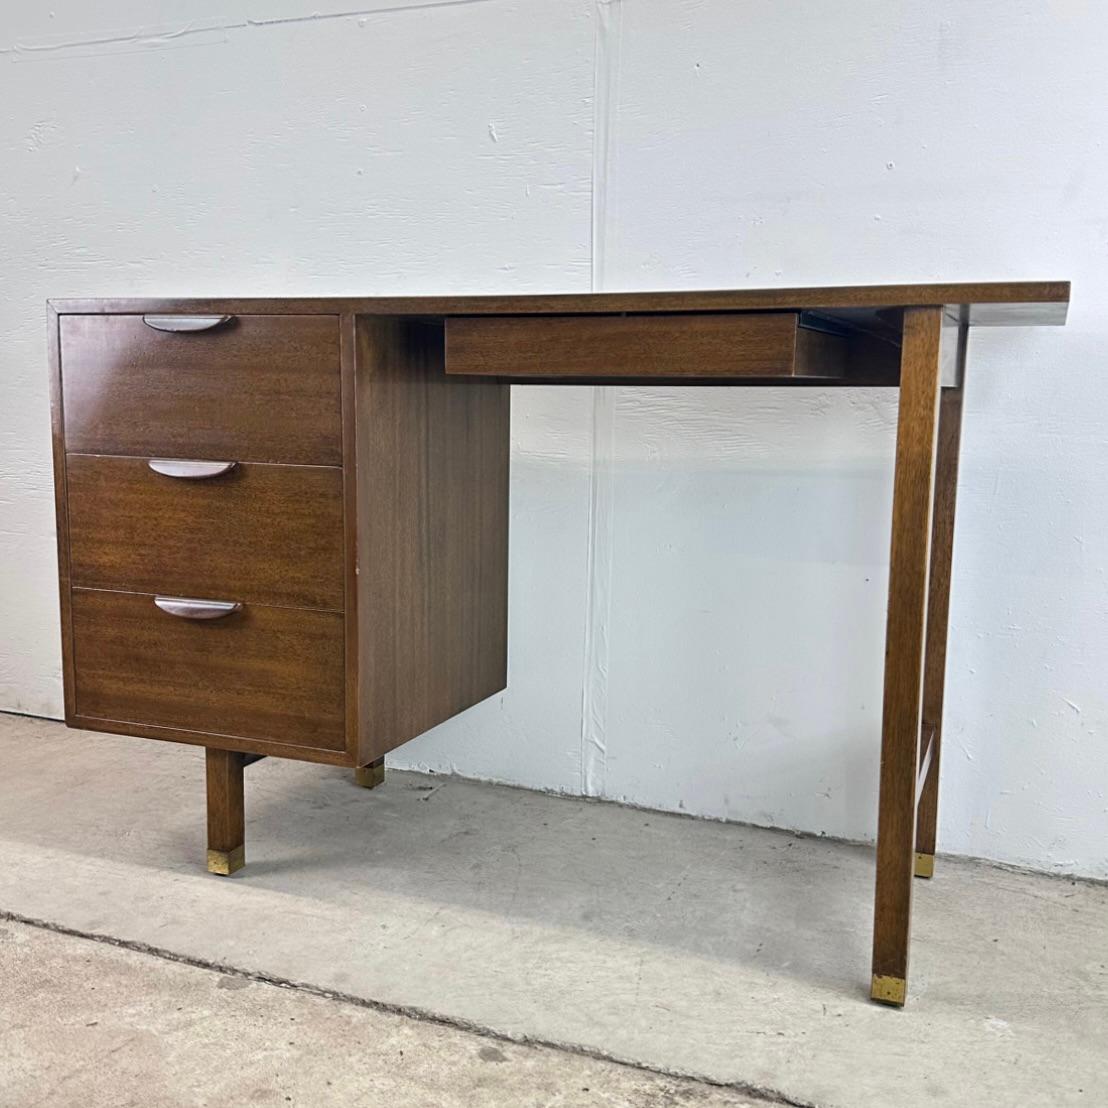 This impressive mid-century modern writing desk from Harvey Probber features a striking yet simple 1950's design in quality manufacture. The vintage mahogany finish, carved wood handles, and brass sabot feet all showcase the unique design of this